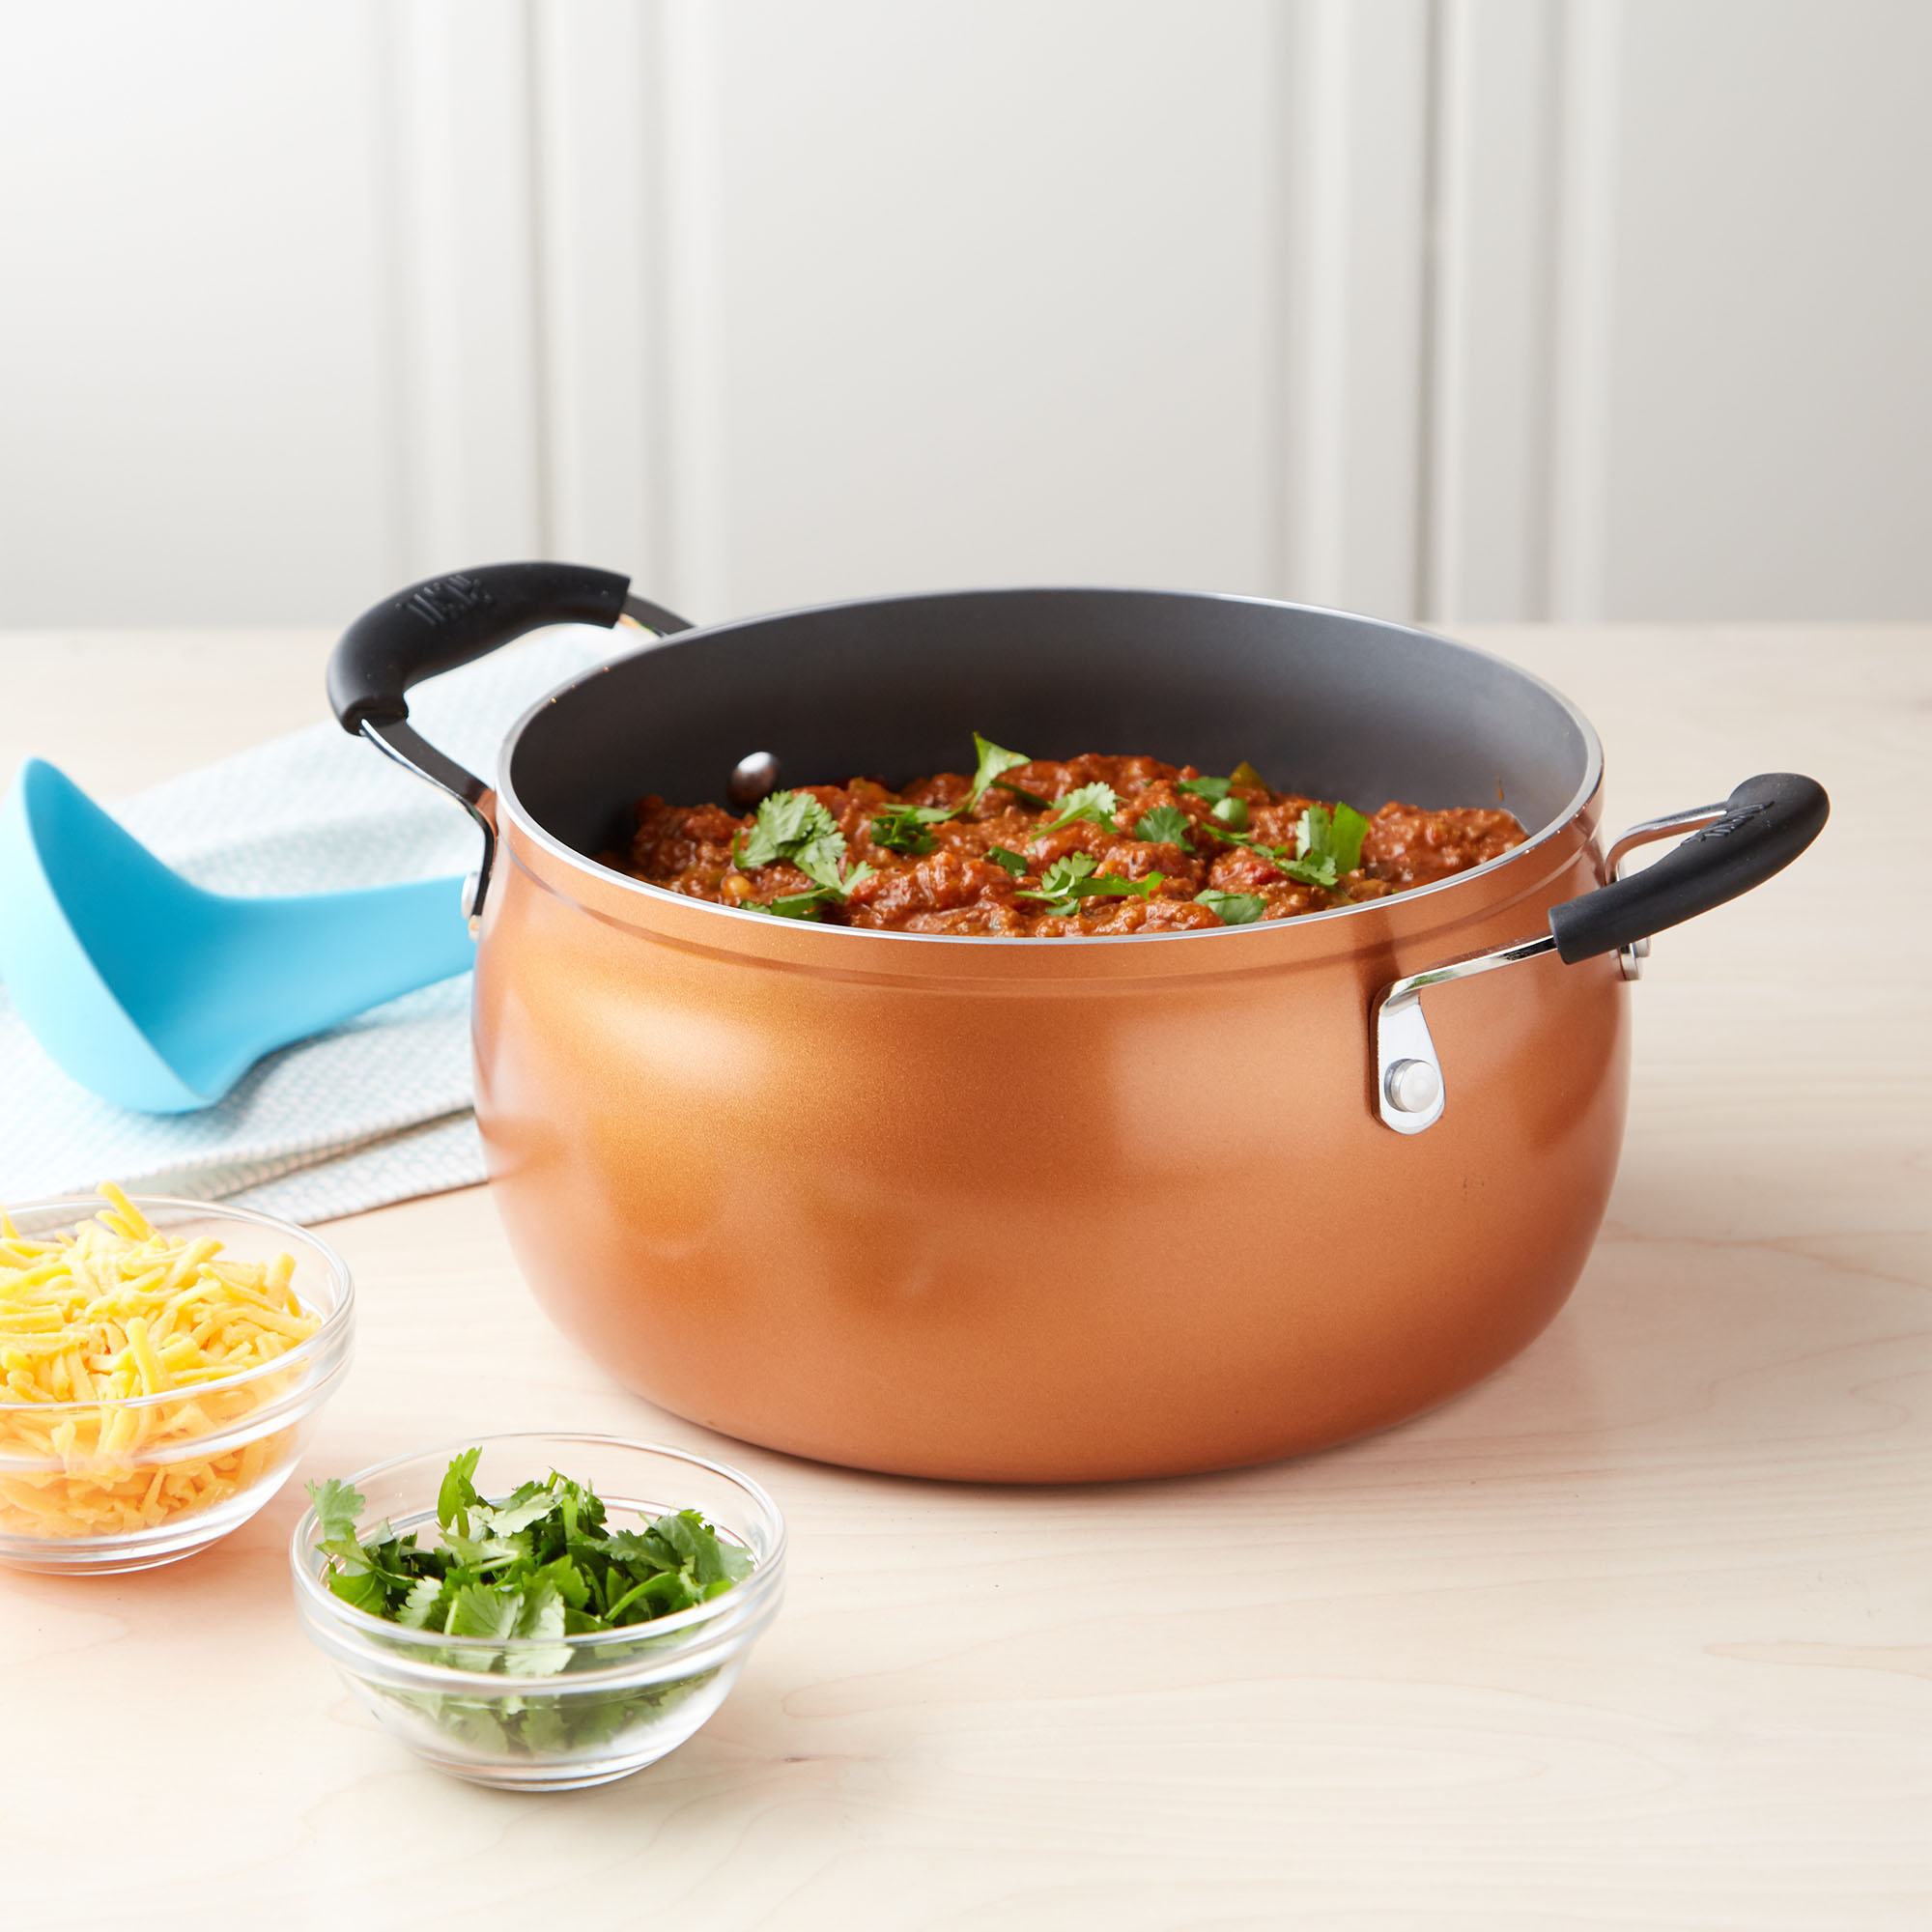 Tasty 5 Quart Non-Stick Dutch Oven with Lid - image 1 of 12